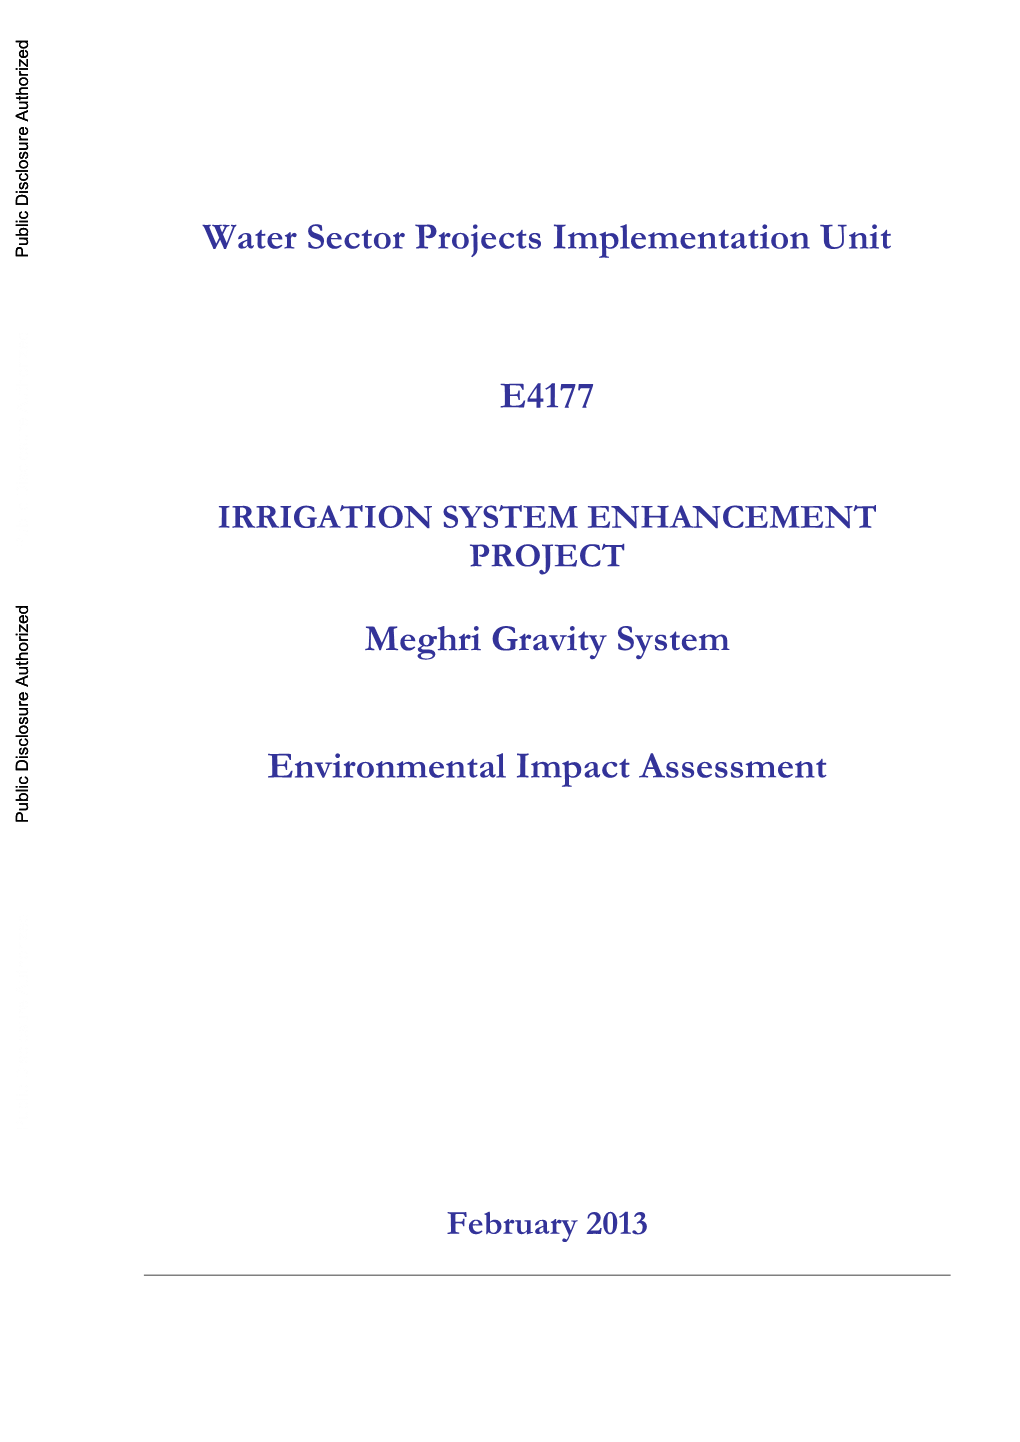 Water Sector Projects Implementation Unit E4177